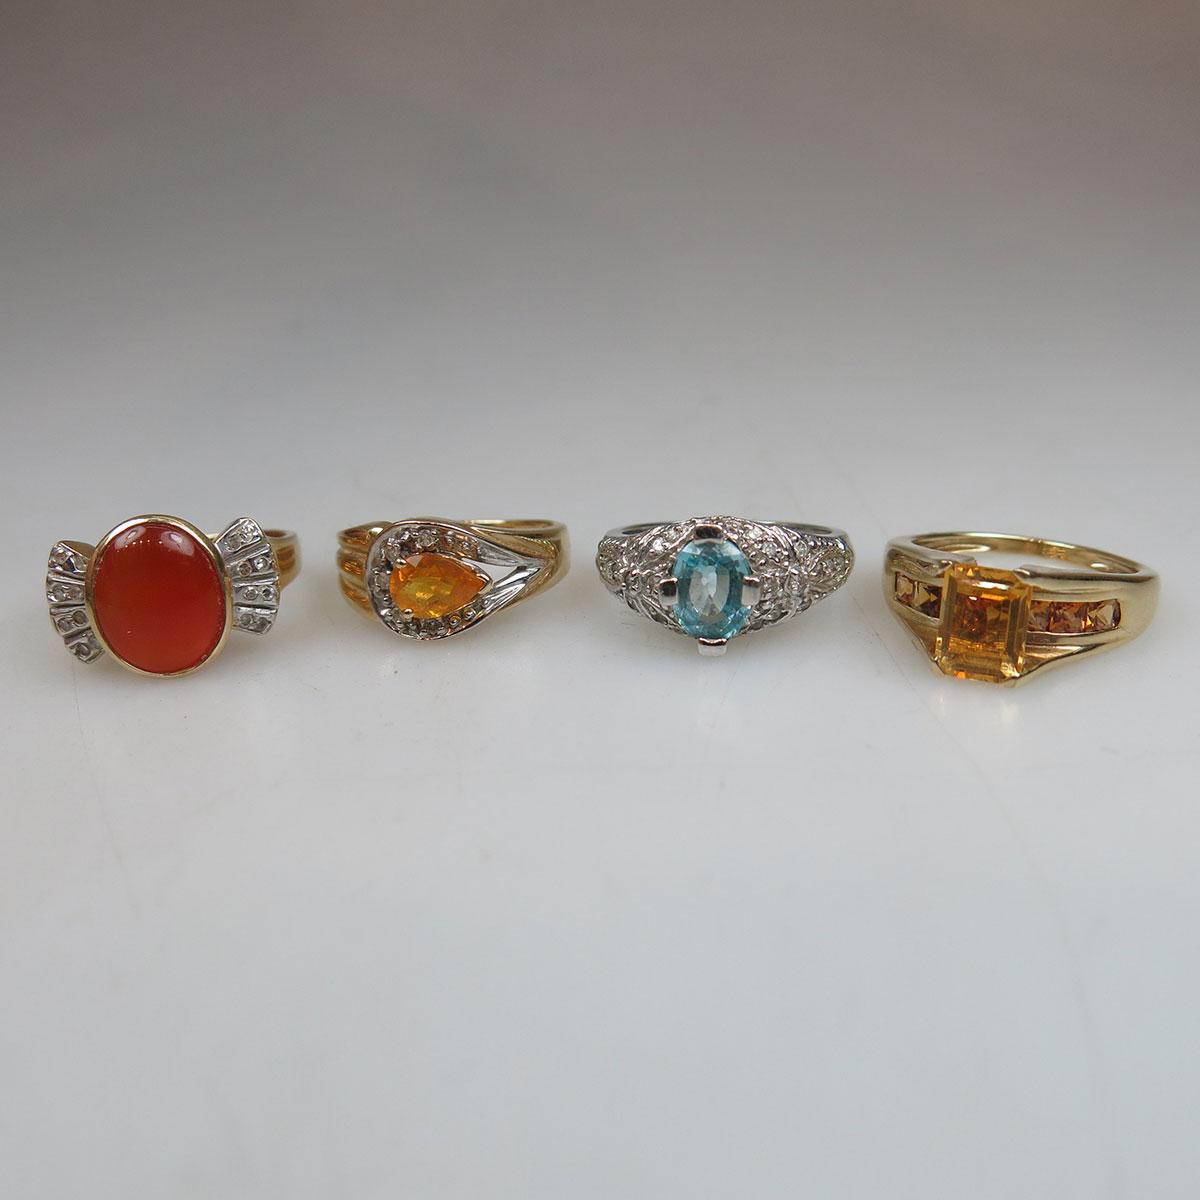 4 x 14k Yellow And White Gold Rings